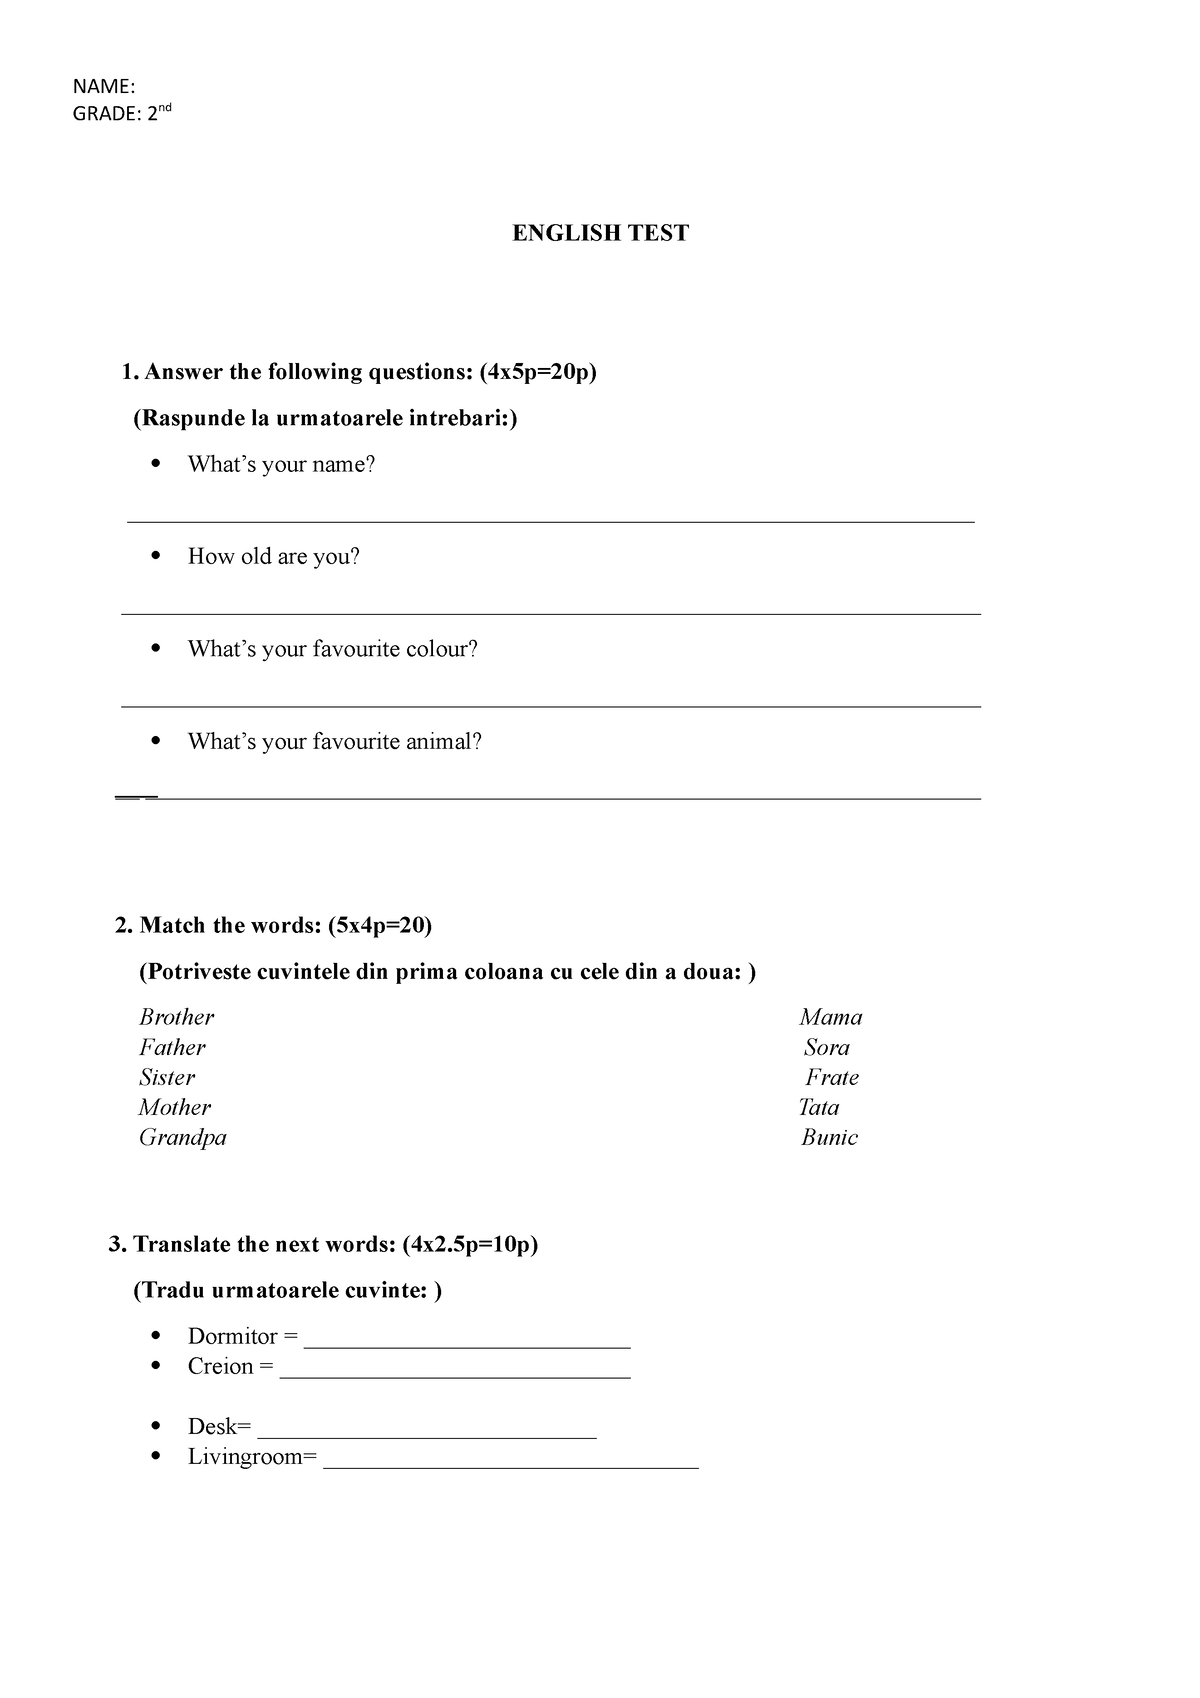 english-test-9th-grade-name-grade-2nd-english-test-answer-the